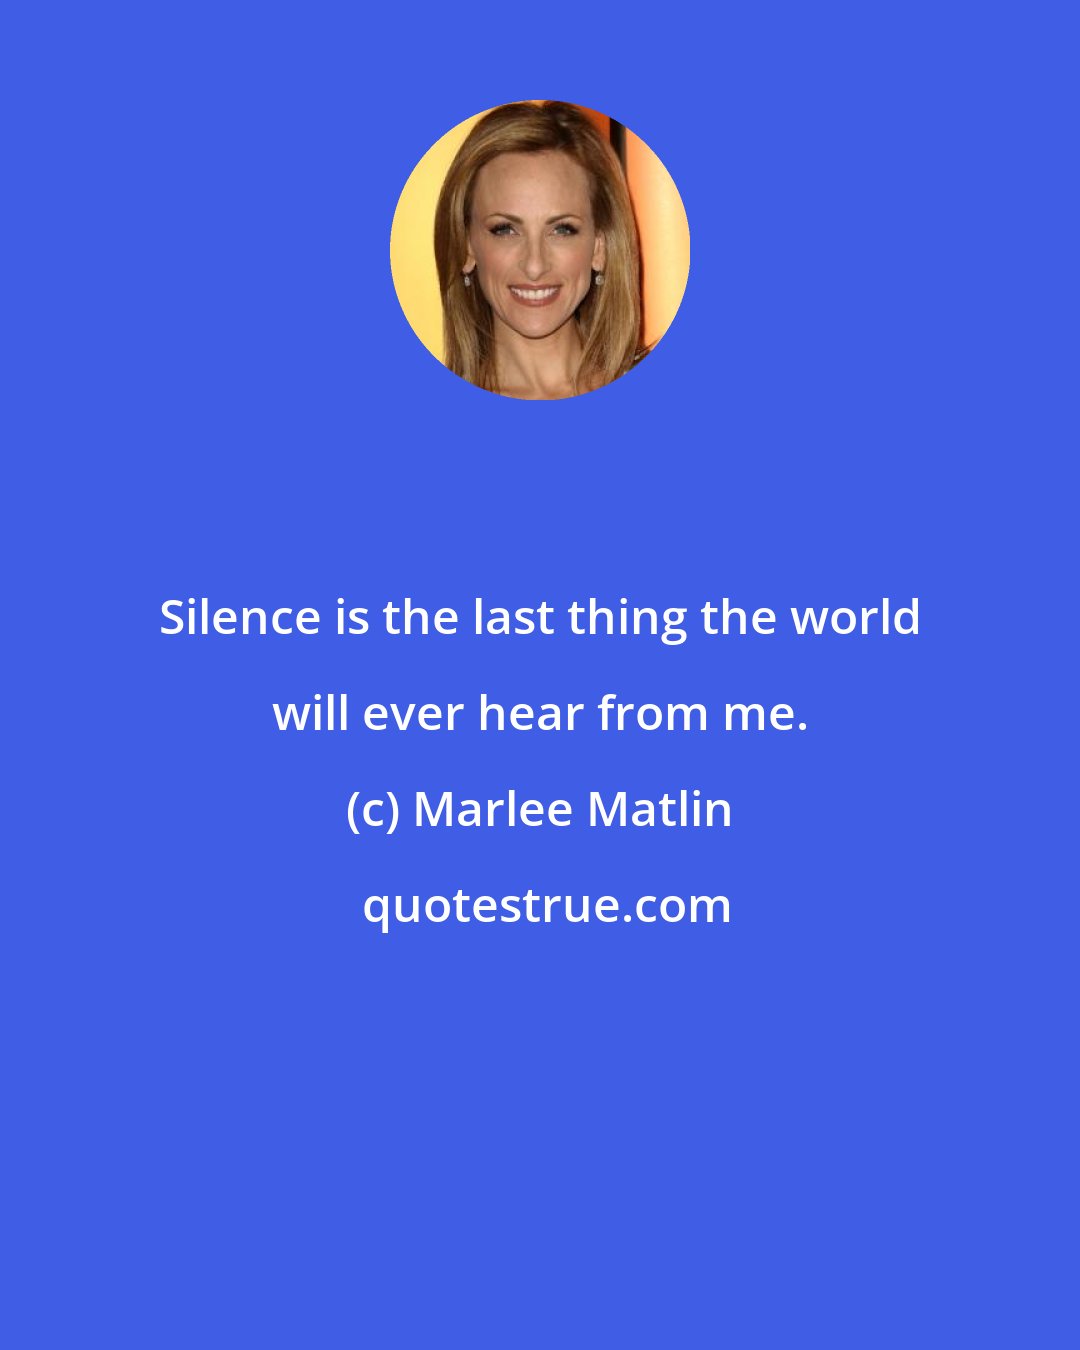 Marlee Matlin: Silence is the last thing the world will ever hear from me.